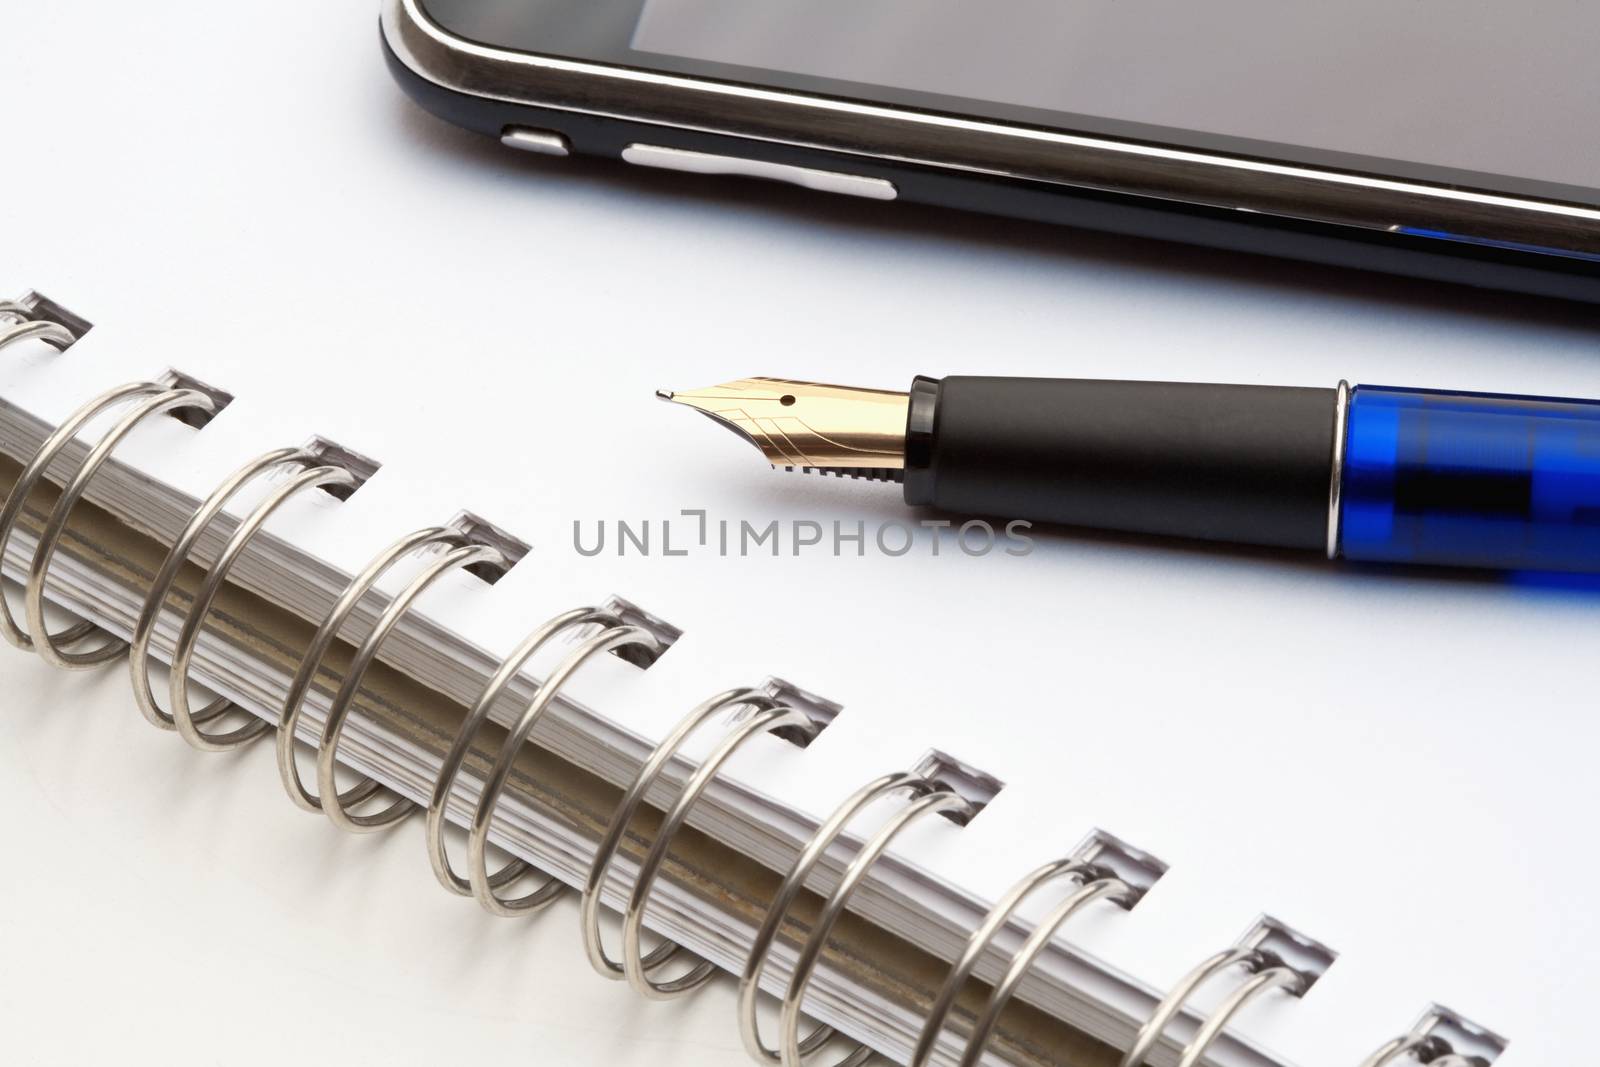 pen, notebook and cell phone by courtyardpix